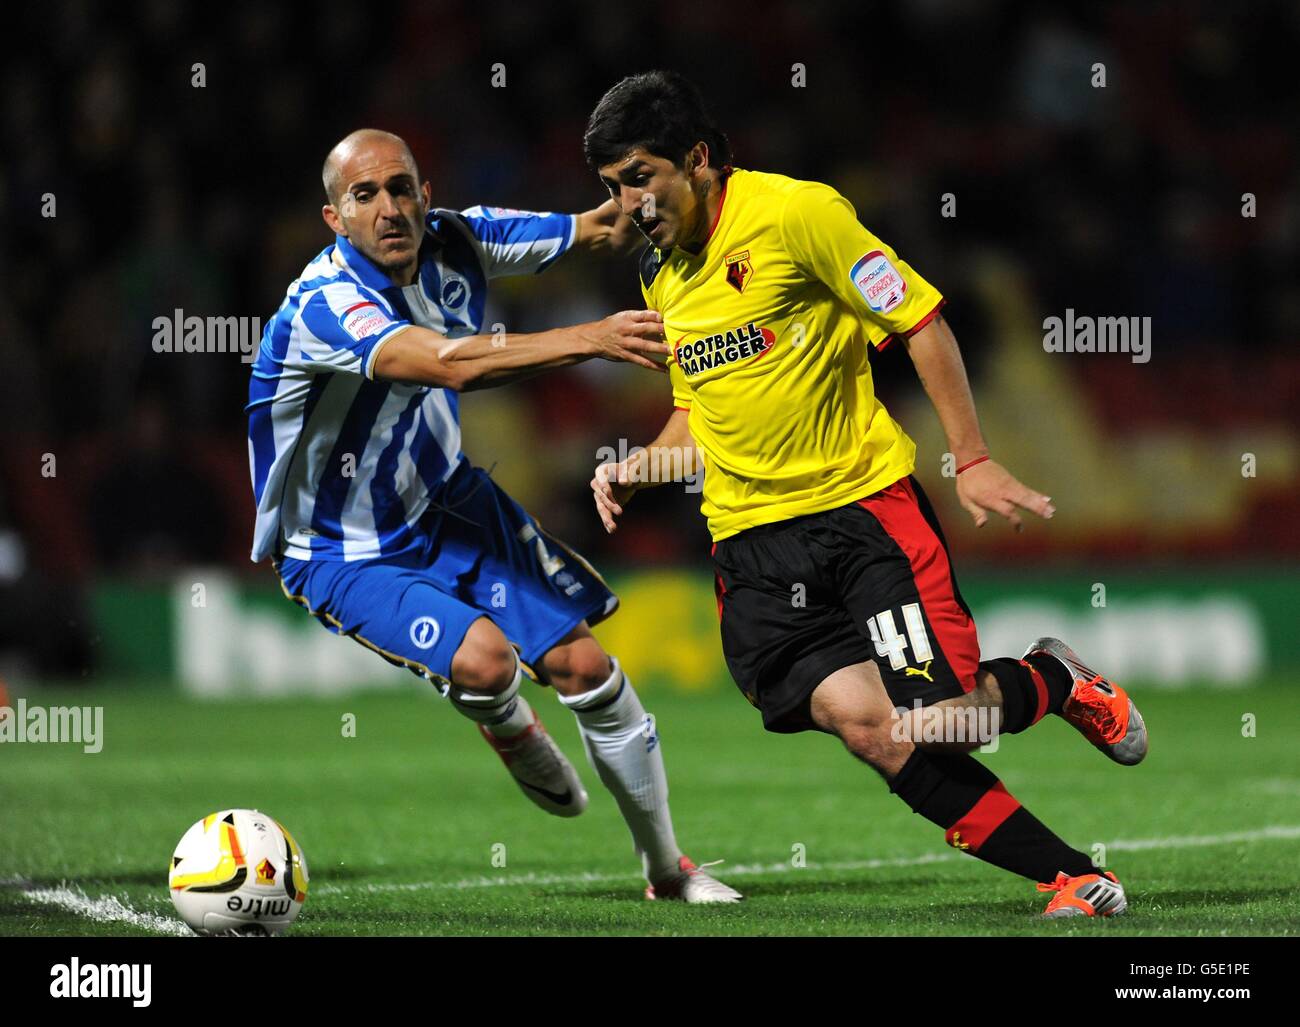 Watford's Fernando Forestieri (right) and Brighton &amp; Hove Albion's Bruno Saltor battle for the ball during the npower Championship match at Vicarage Road, Watford. Stock Photo